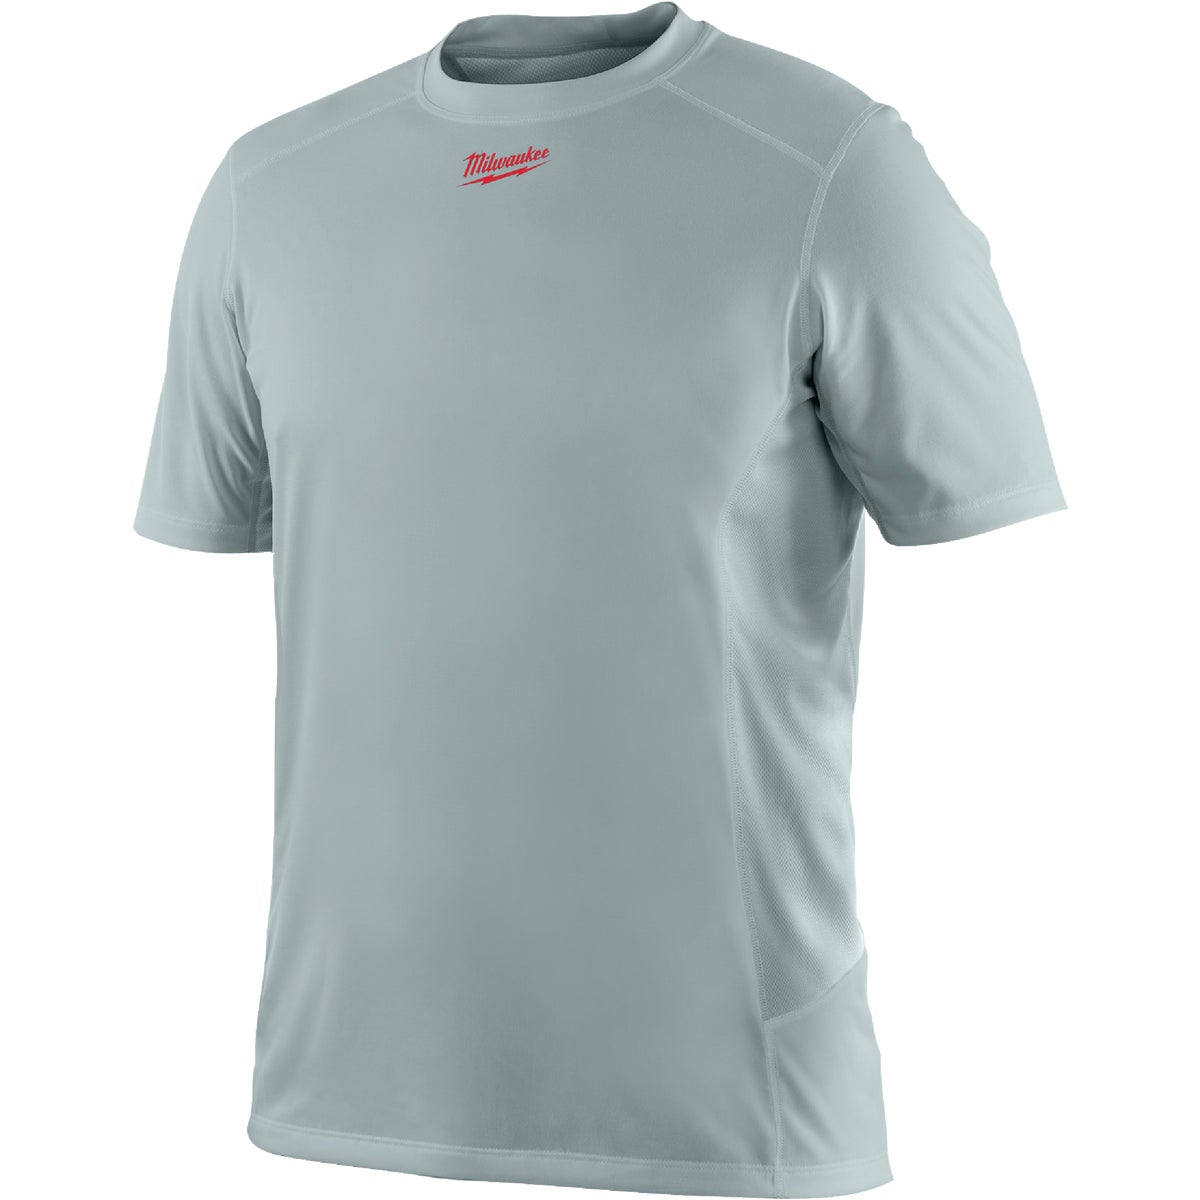 Item 700235, Durable lightweight shirt designed for tradesmen who need a next-to-skin 